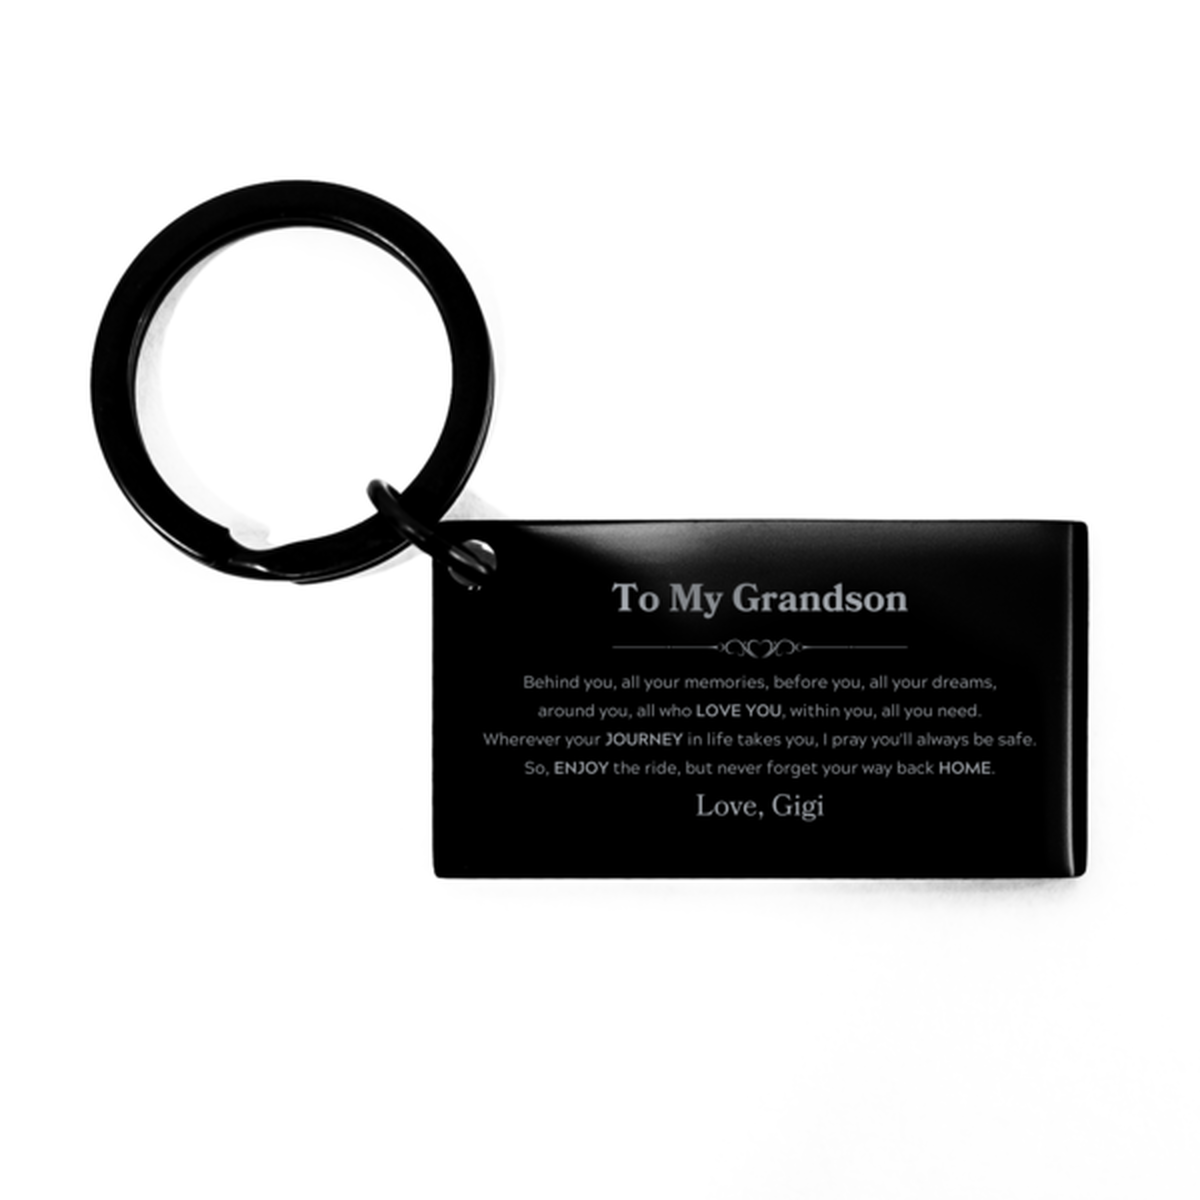 To My Grandson Graduation Gifts from Gigi, Grandson Keychain Christmas Birthday Gifts for Grandson Behind you, all your memories, before you, all your dreams. Love, Gigi